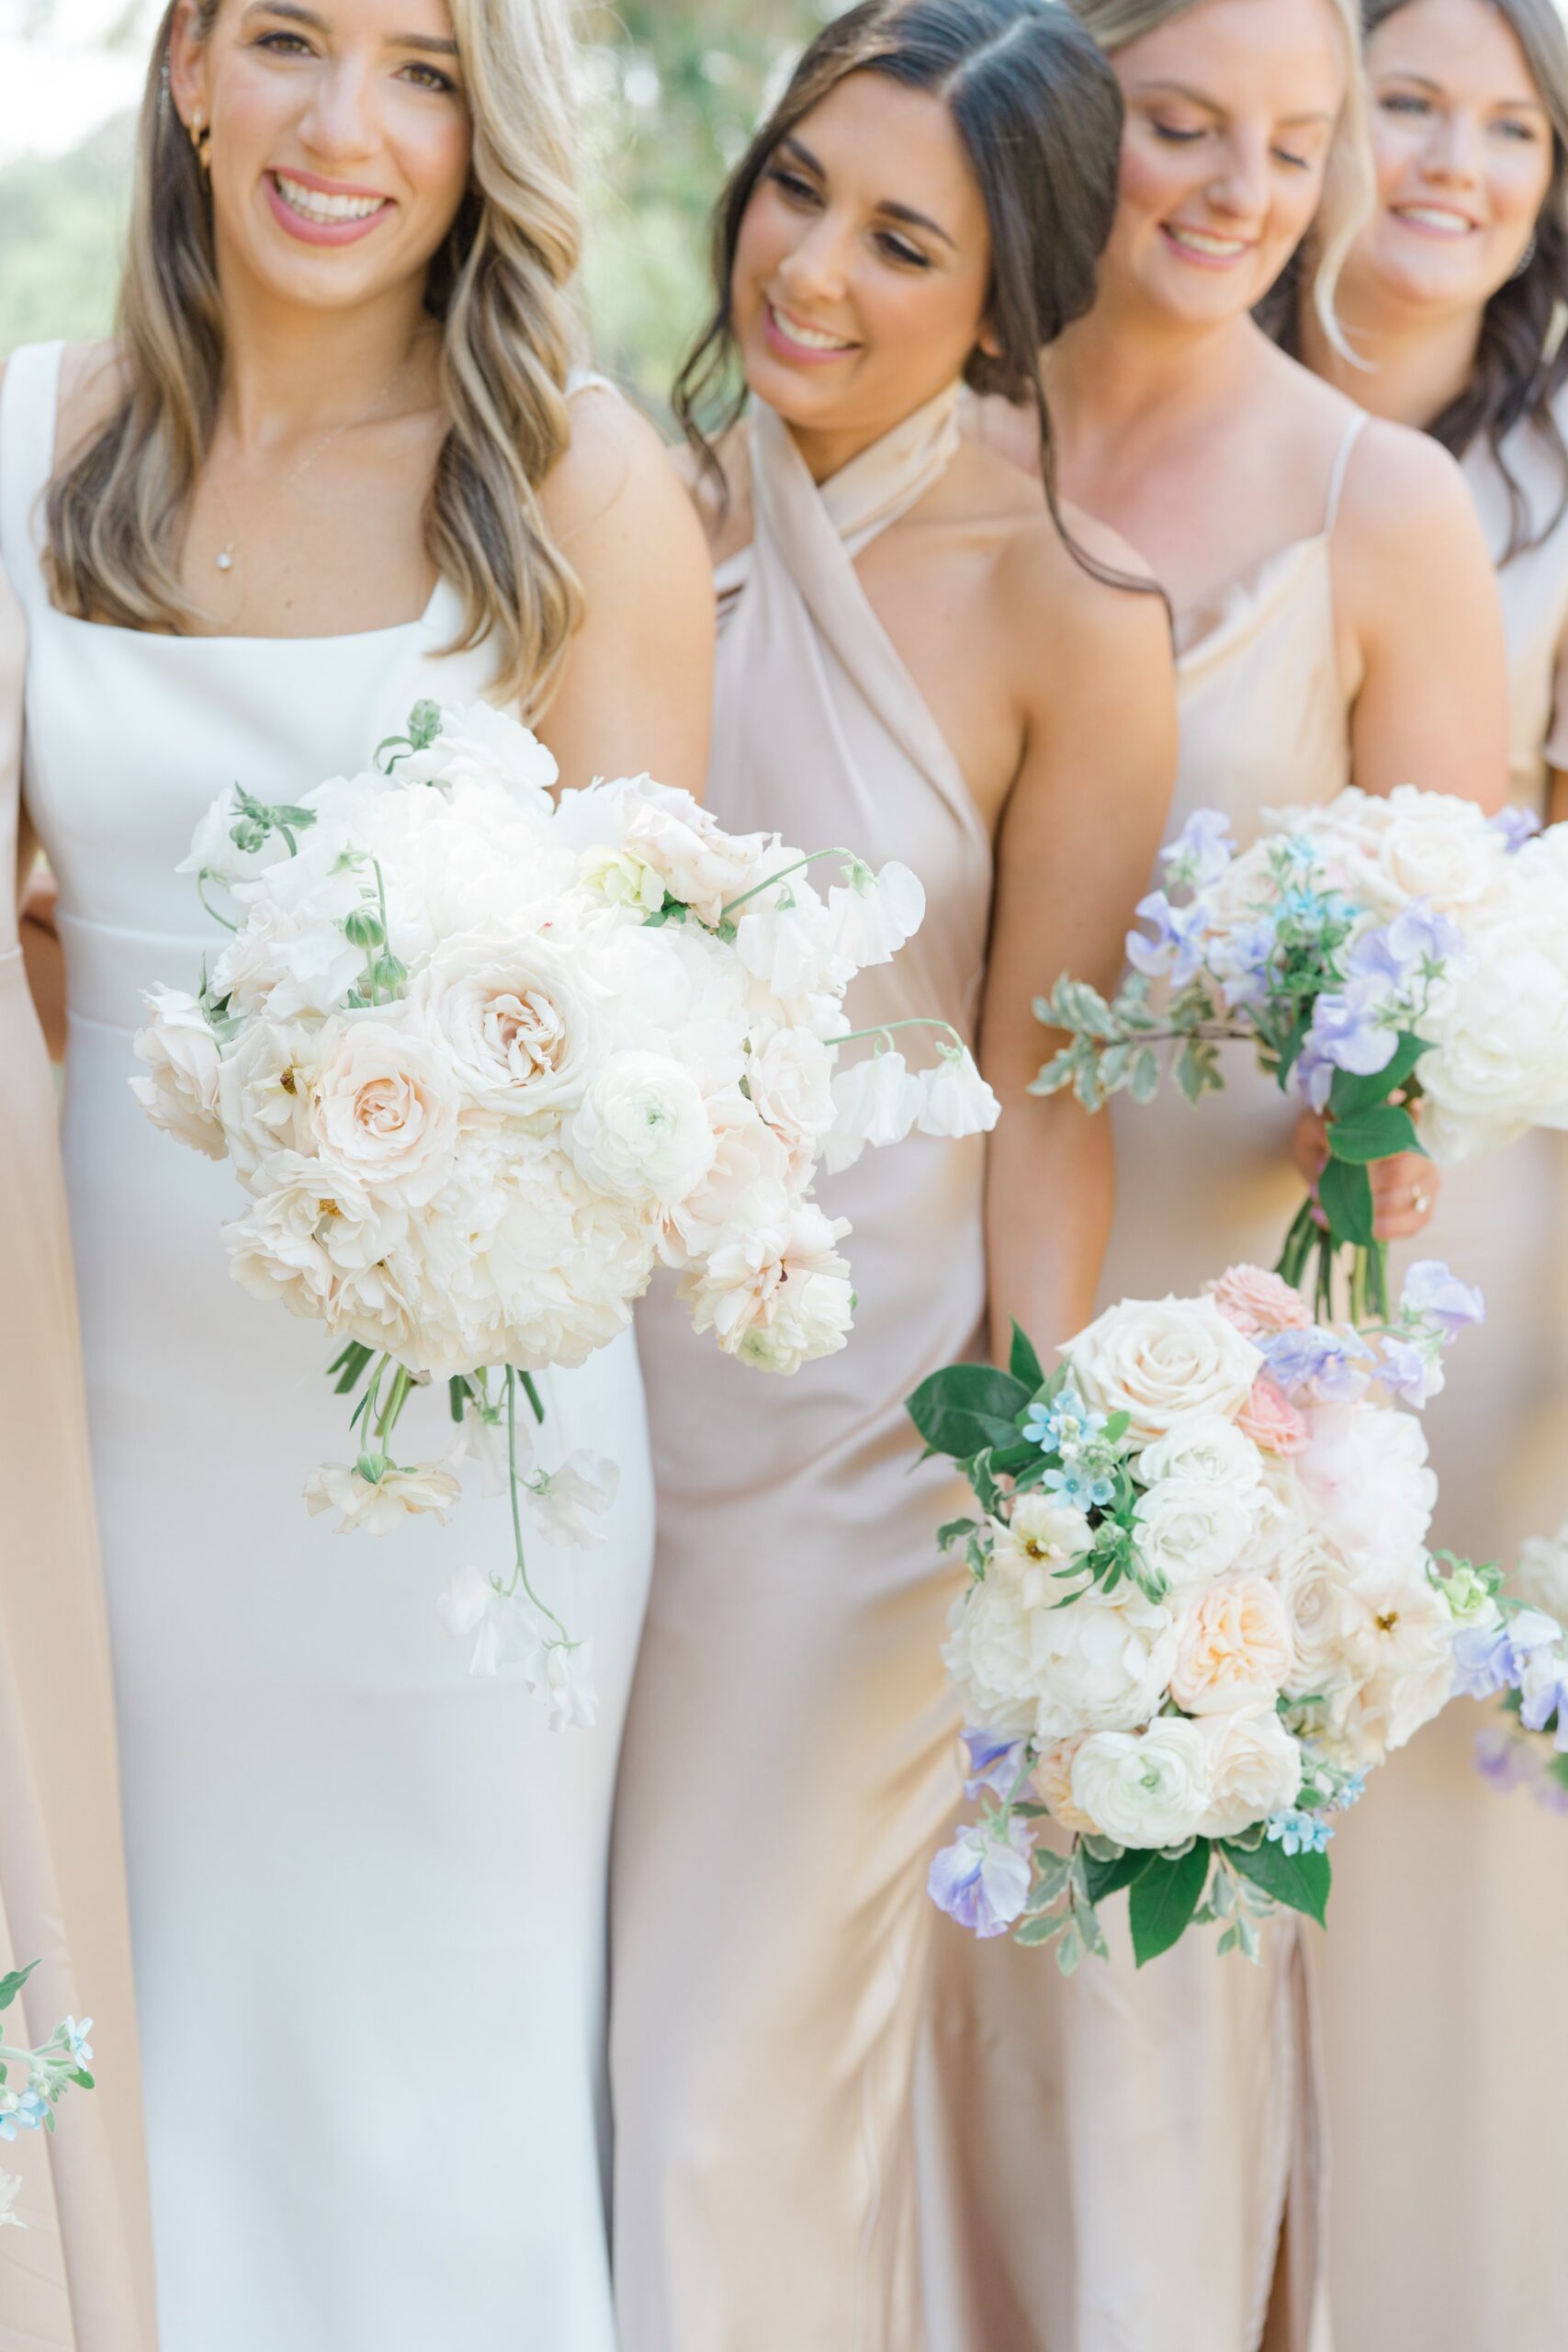 Bride with bridesmaids and flowers.